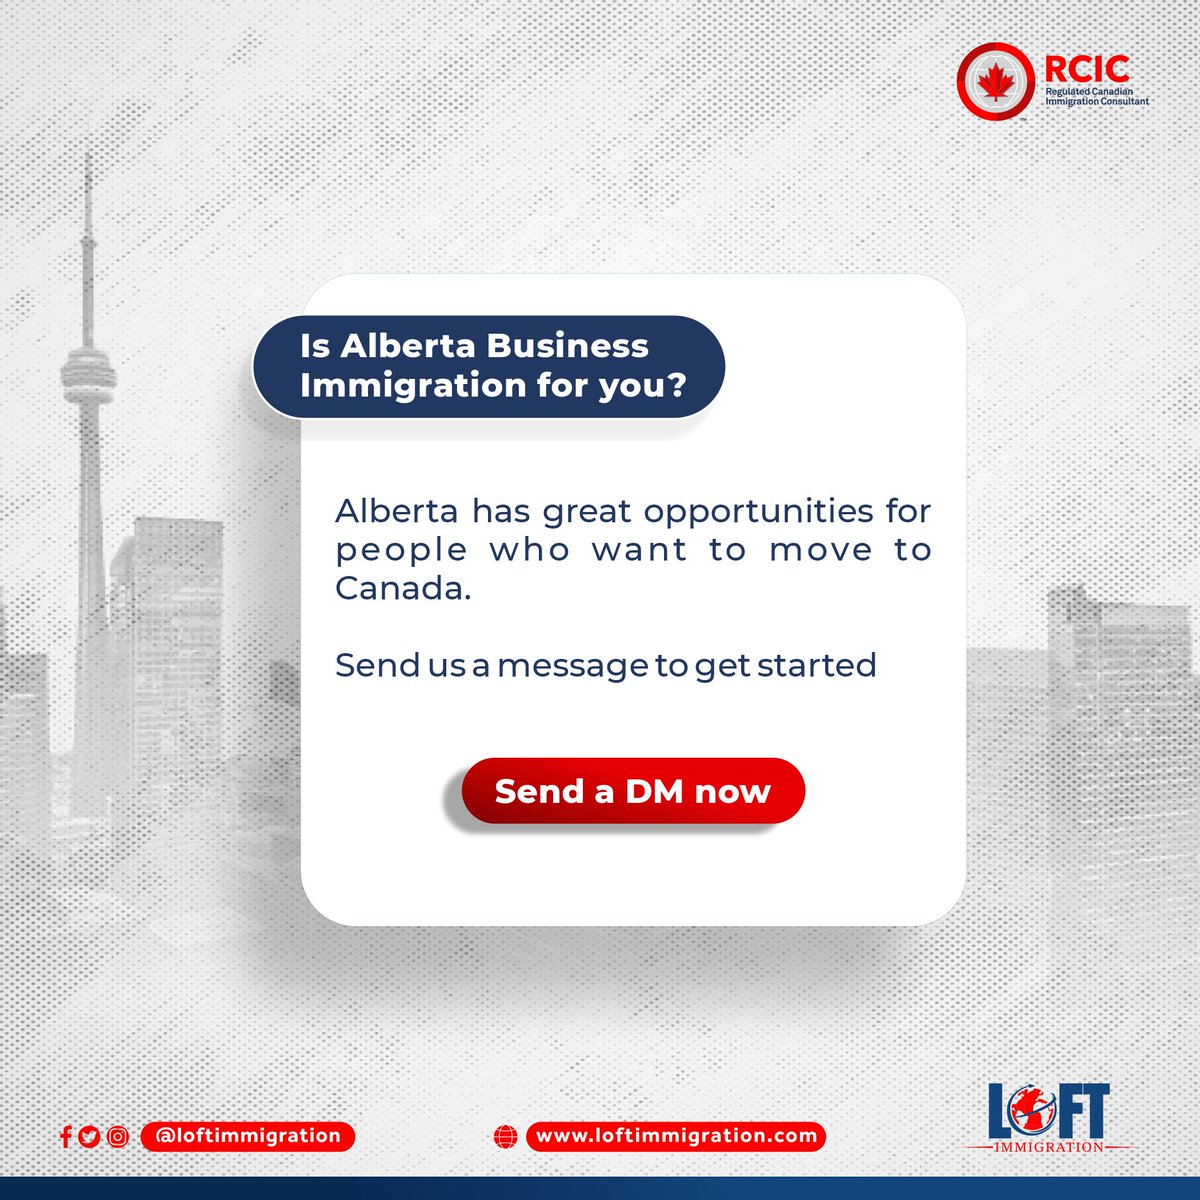 Canada’s immigration system is equitable and treats all applicants equally, without bias towards nationality. Each individual, however, has unique circumstances, such as age, financial capability, educational background, and family situation.

These differences...